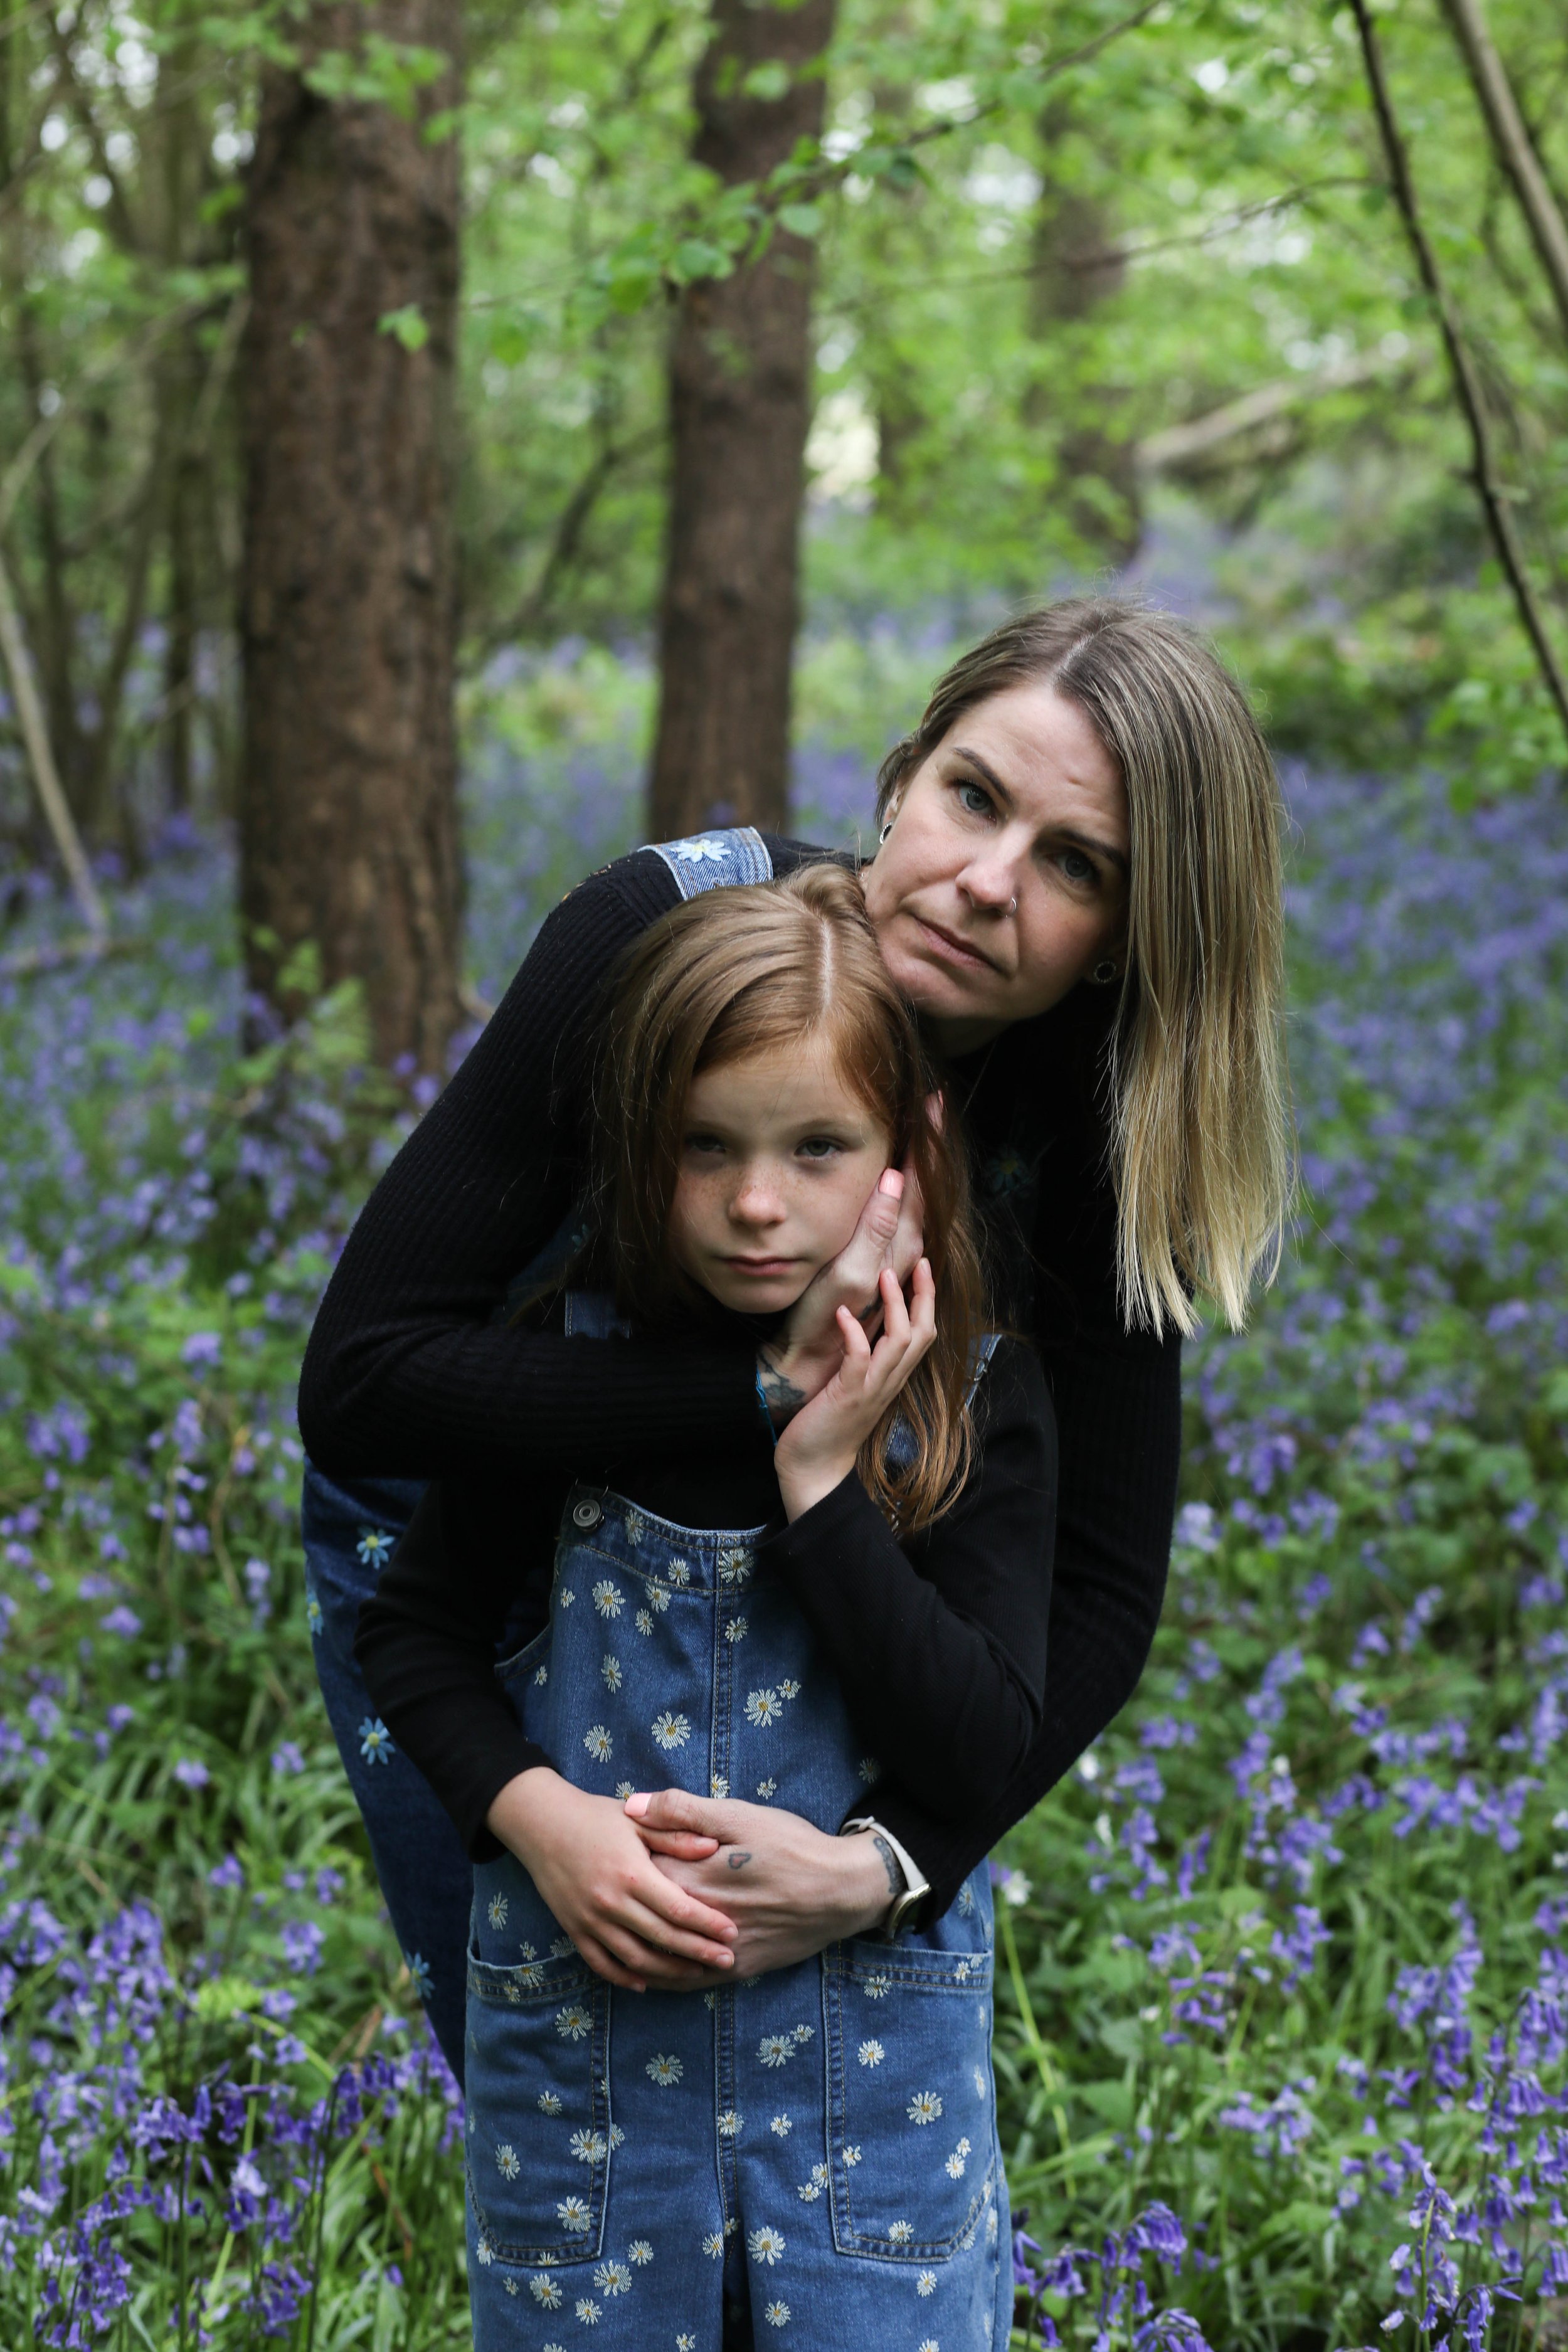 MUM AND DAUGHTER PHOTO SHOOT IN THE BLUEBELLS | BERKSHIRE PORTRAIT SHOOTS56 choice .JPG